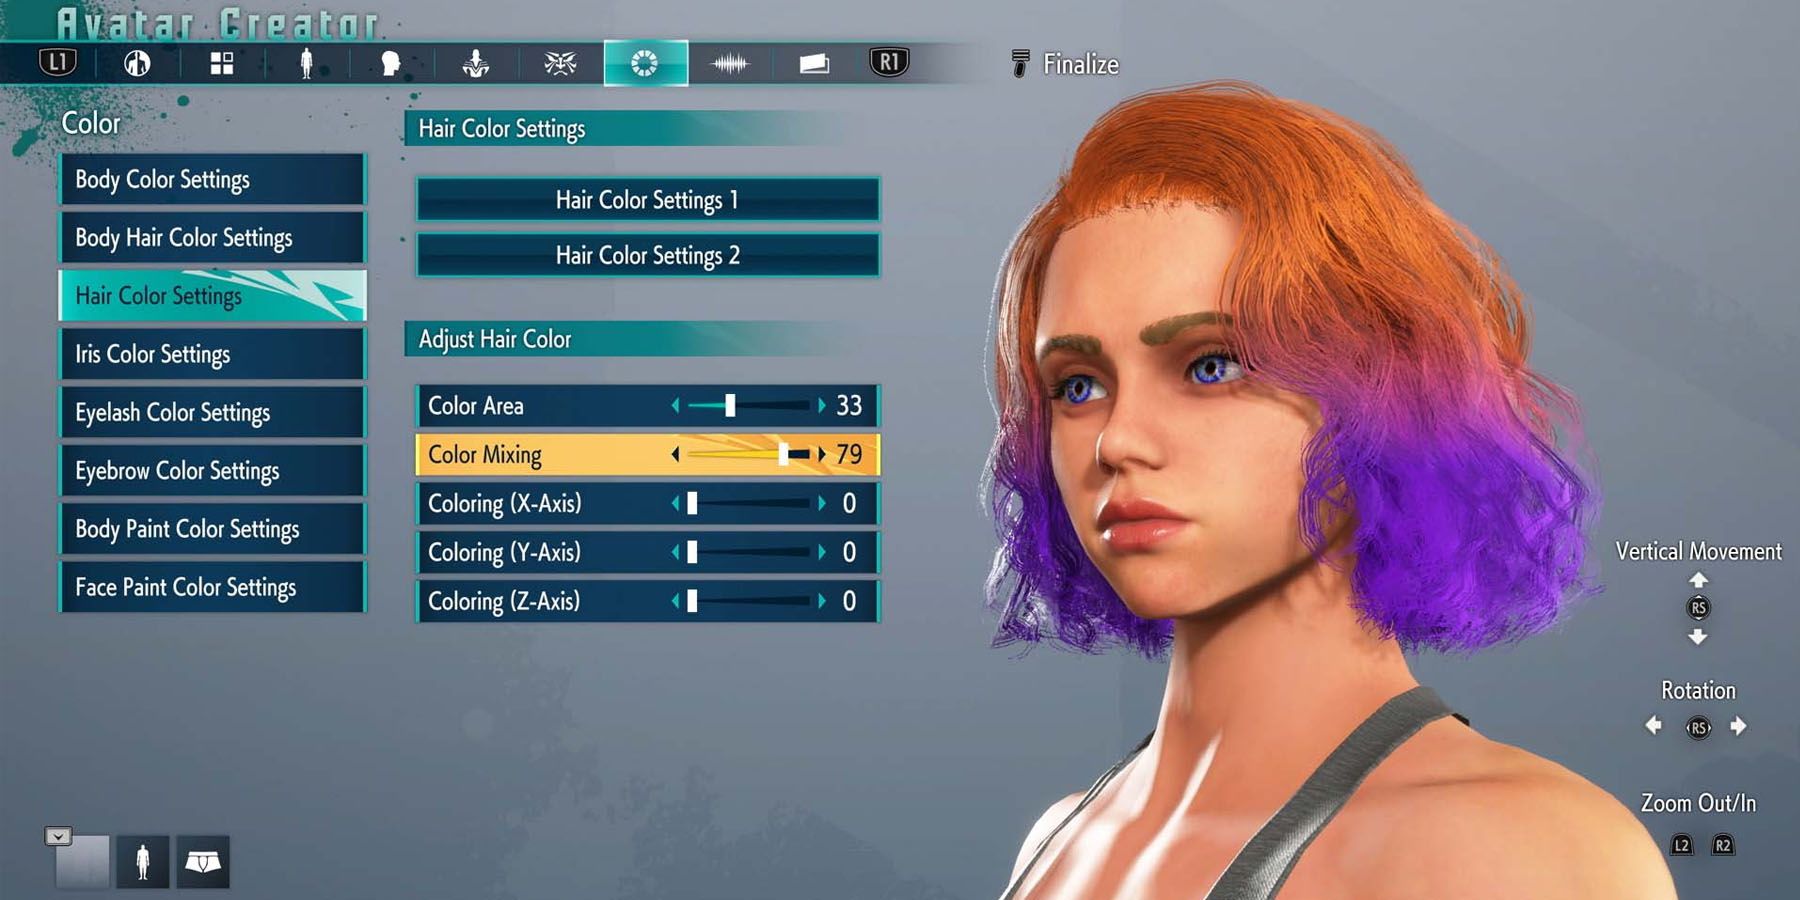 The Street Fighter 6 Beta Character Creator is Generating Some